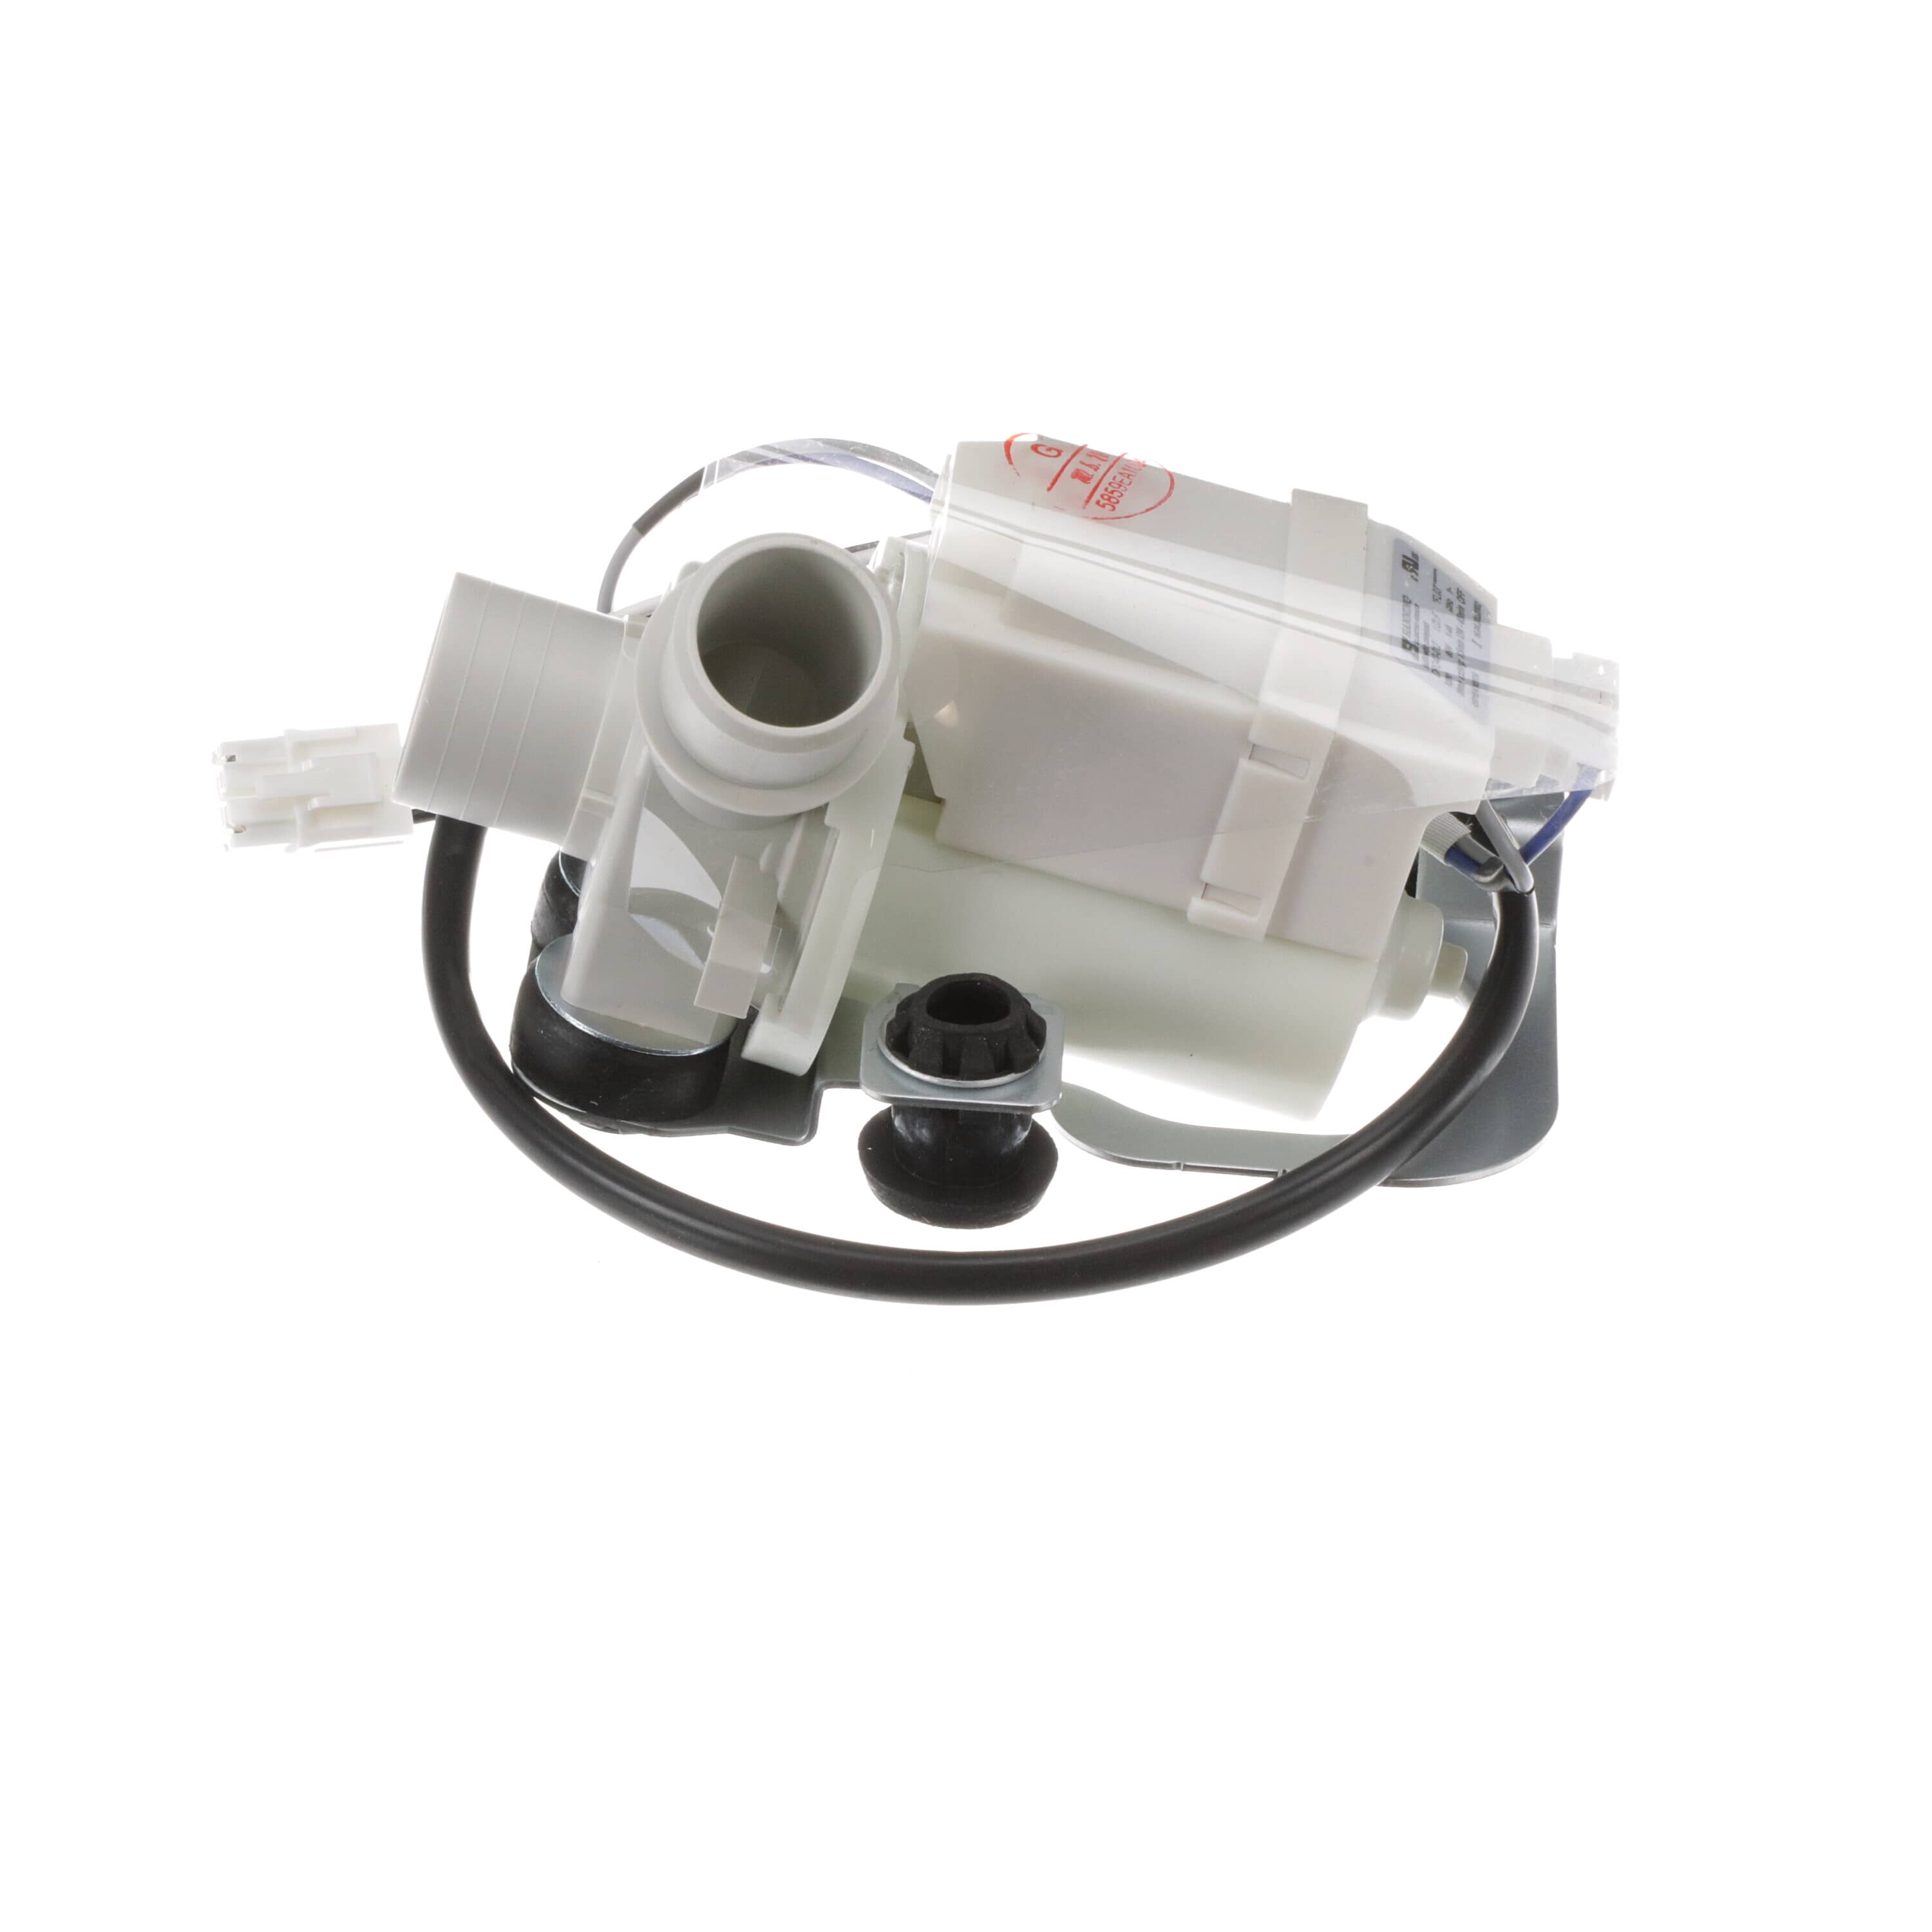 LG 5859EA1004G Washer Drain Pump Assembly